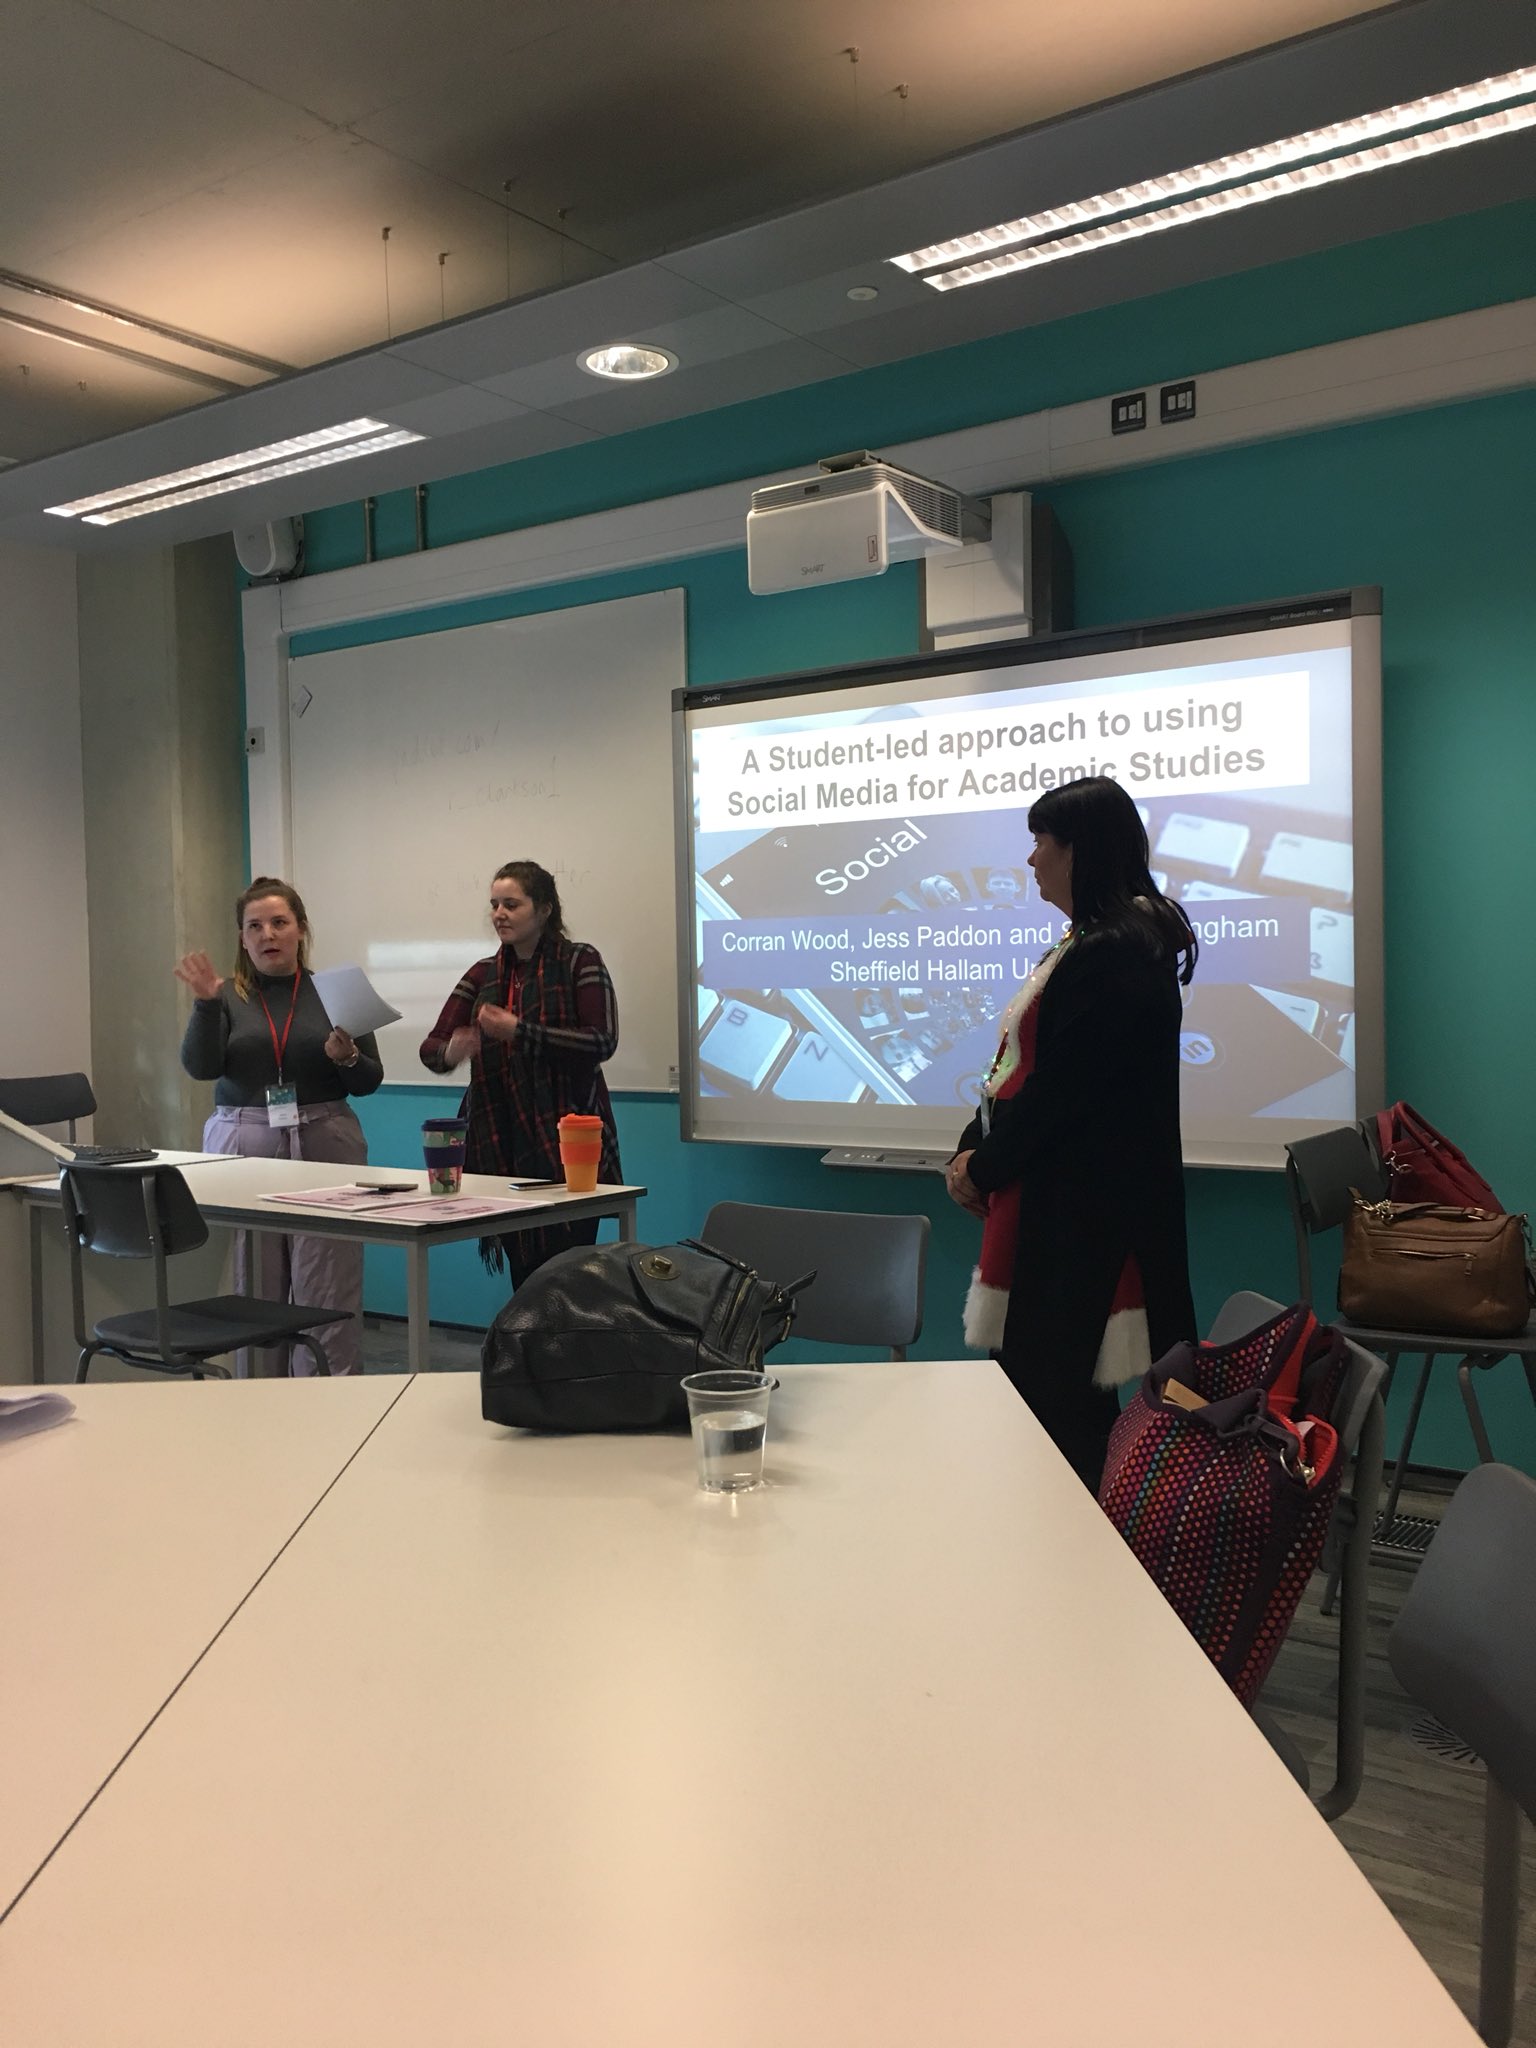 SMASH session, discussing what we have done and our background! #SocMedHE17 #shuSMASH https://t.co/zDiAwpsEJJ